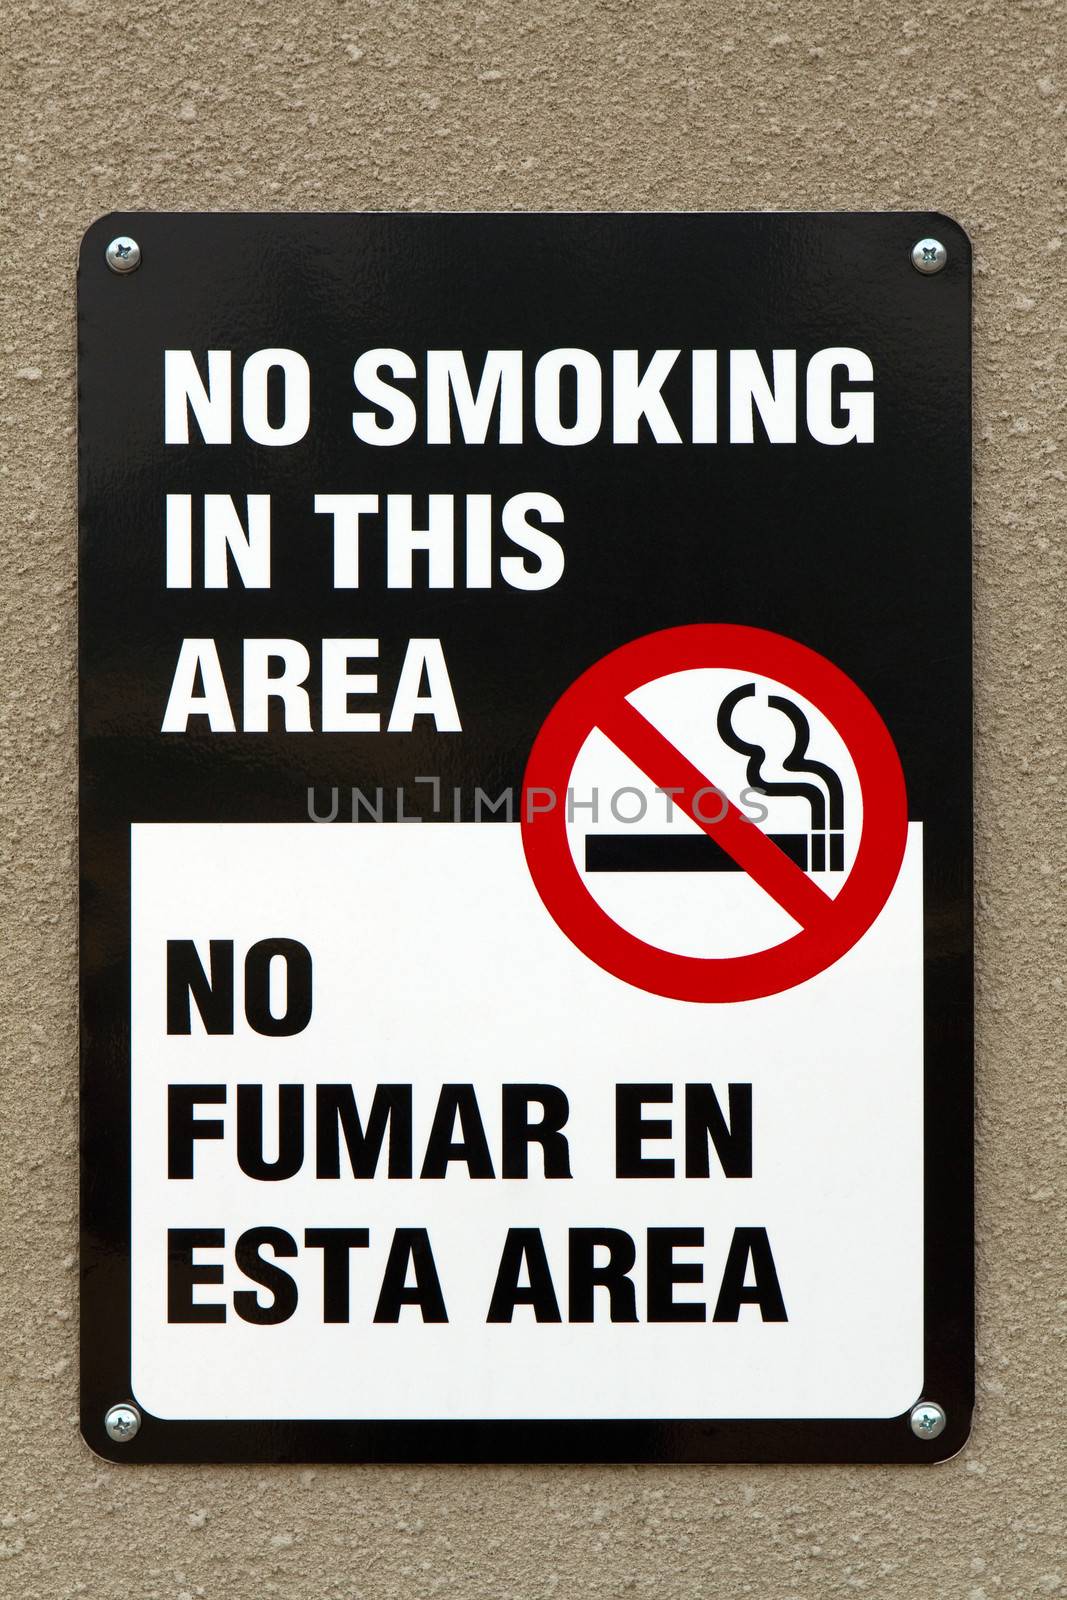 Bilingual no smoking sign with graphic and written in the English and Spanish languages is screwed to a wall.